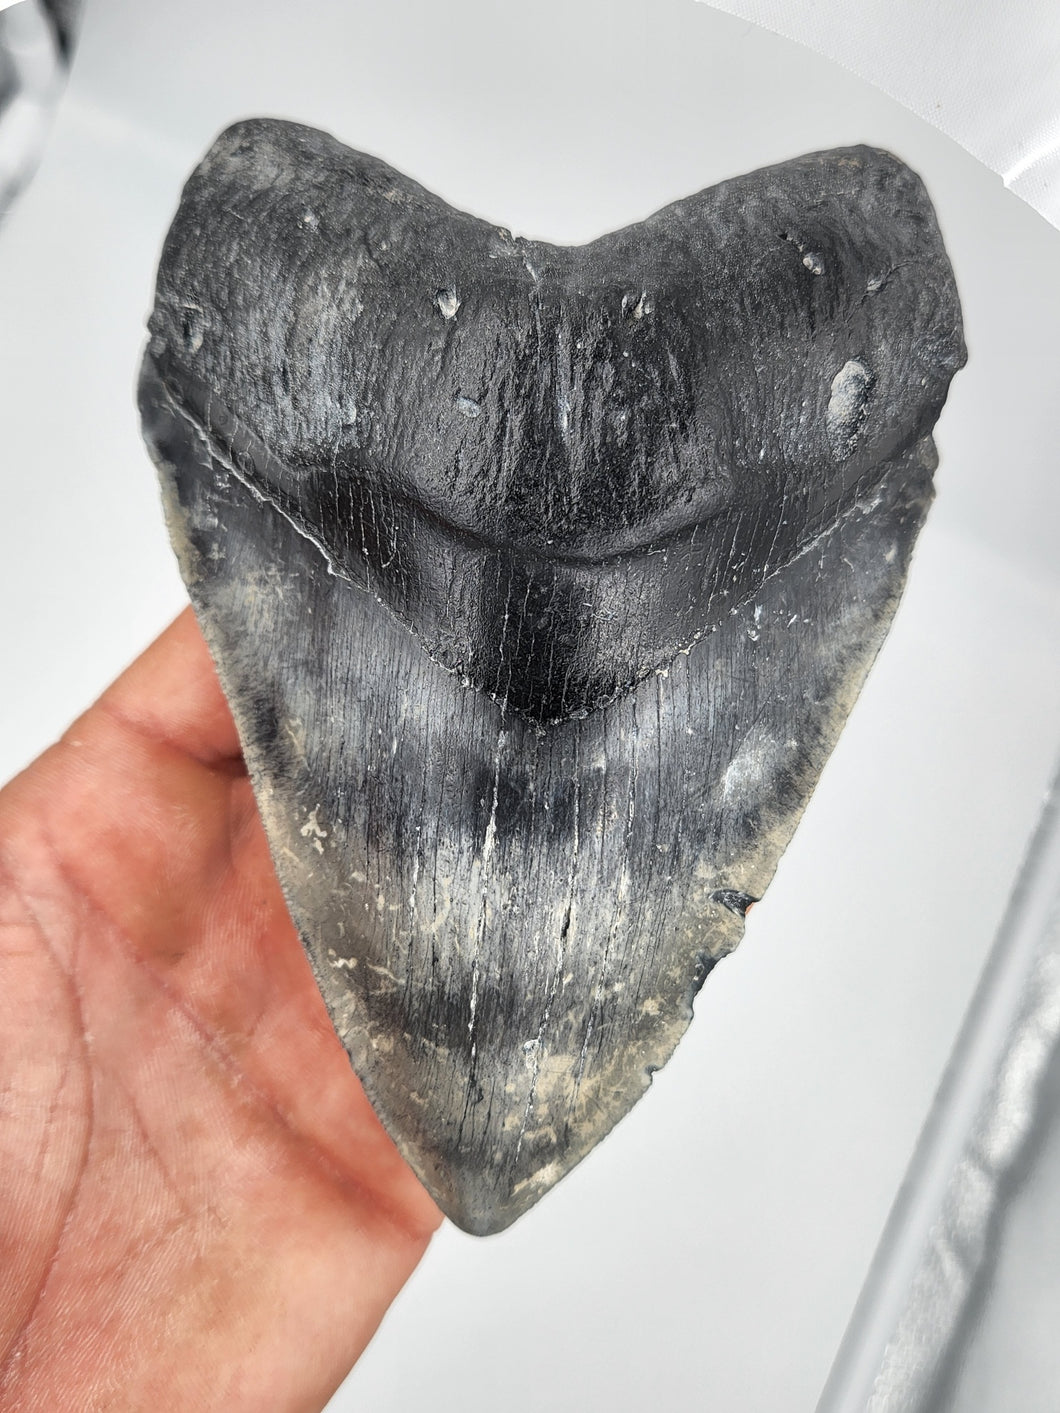 Massive Megalodon Shark Fossil for Sale. Nearly six inches long found scuba diving in Venice, Florida with amazing quality